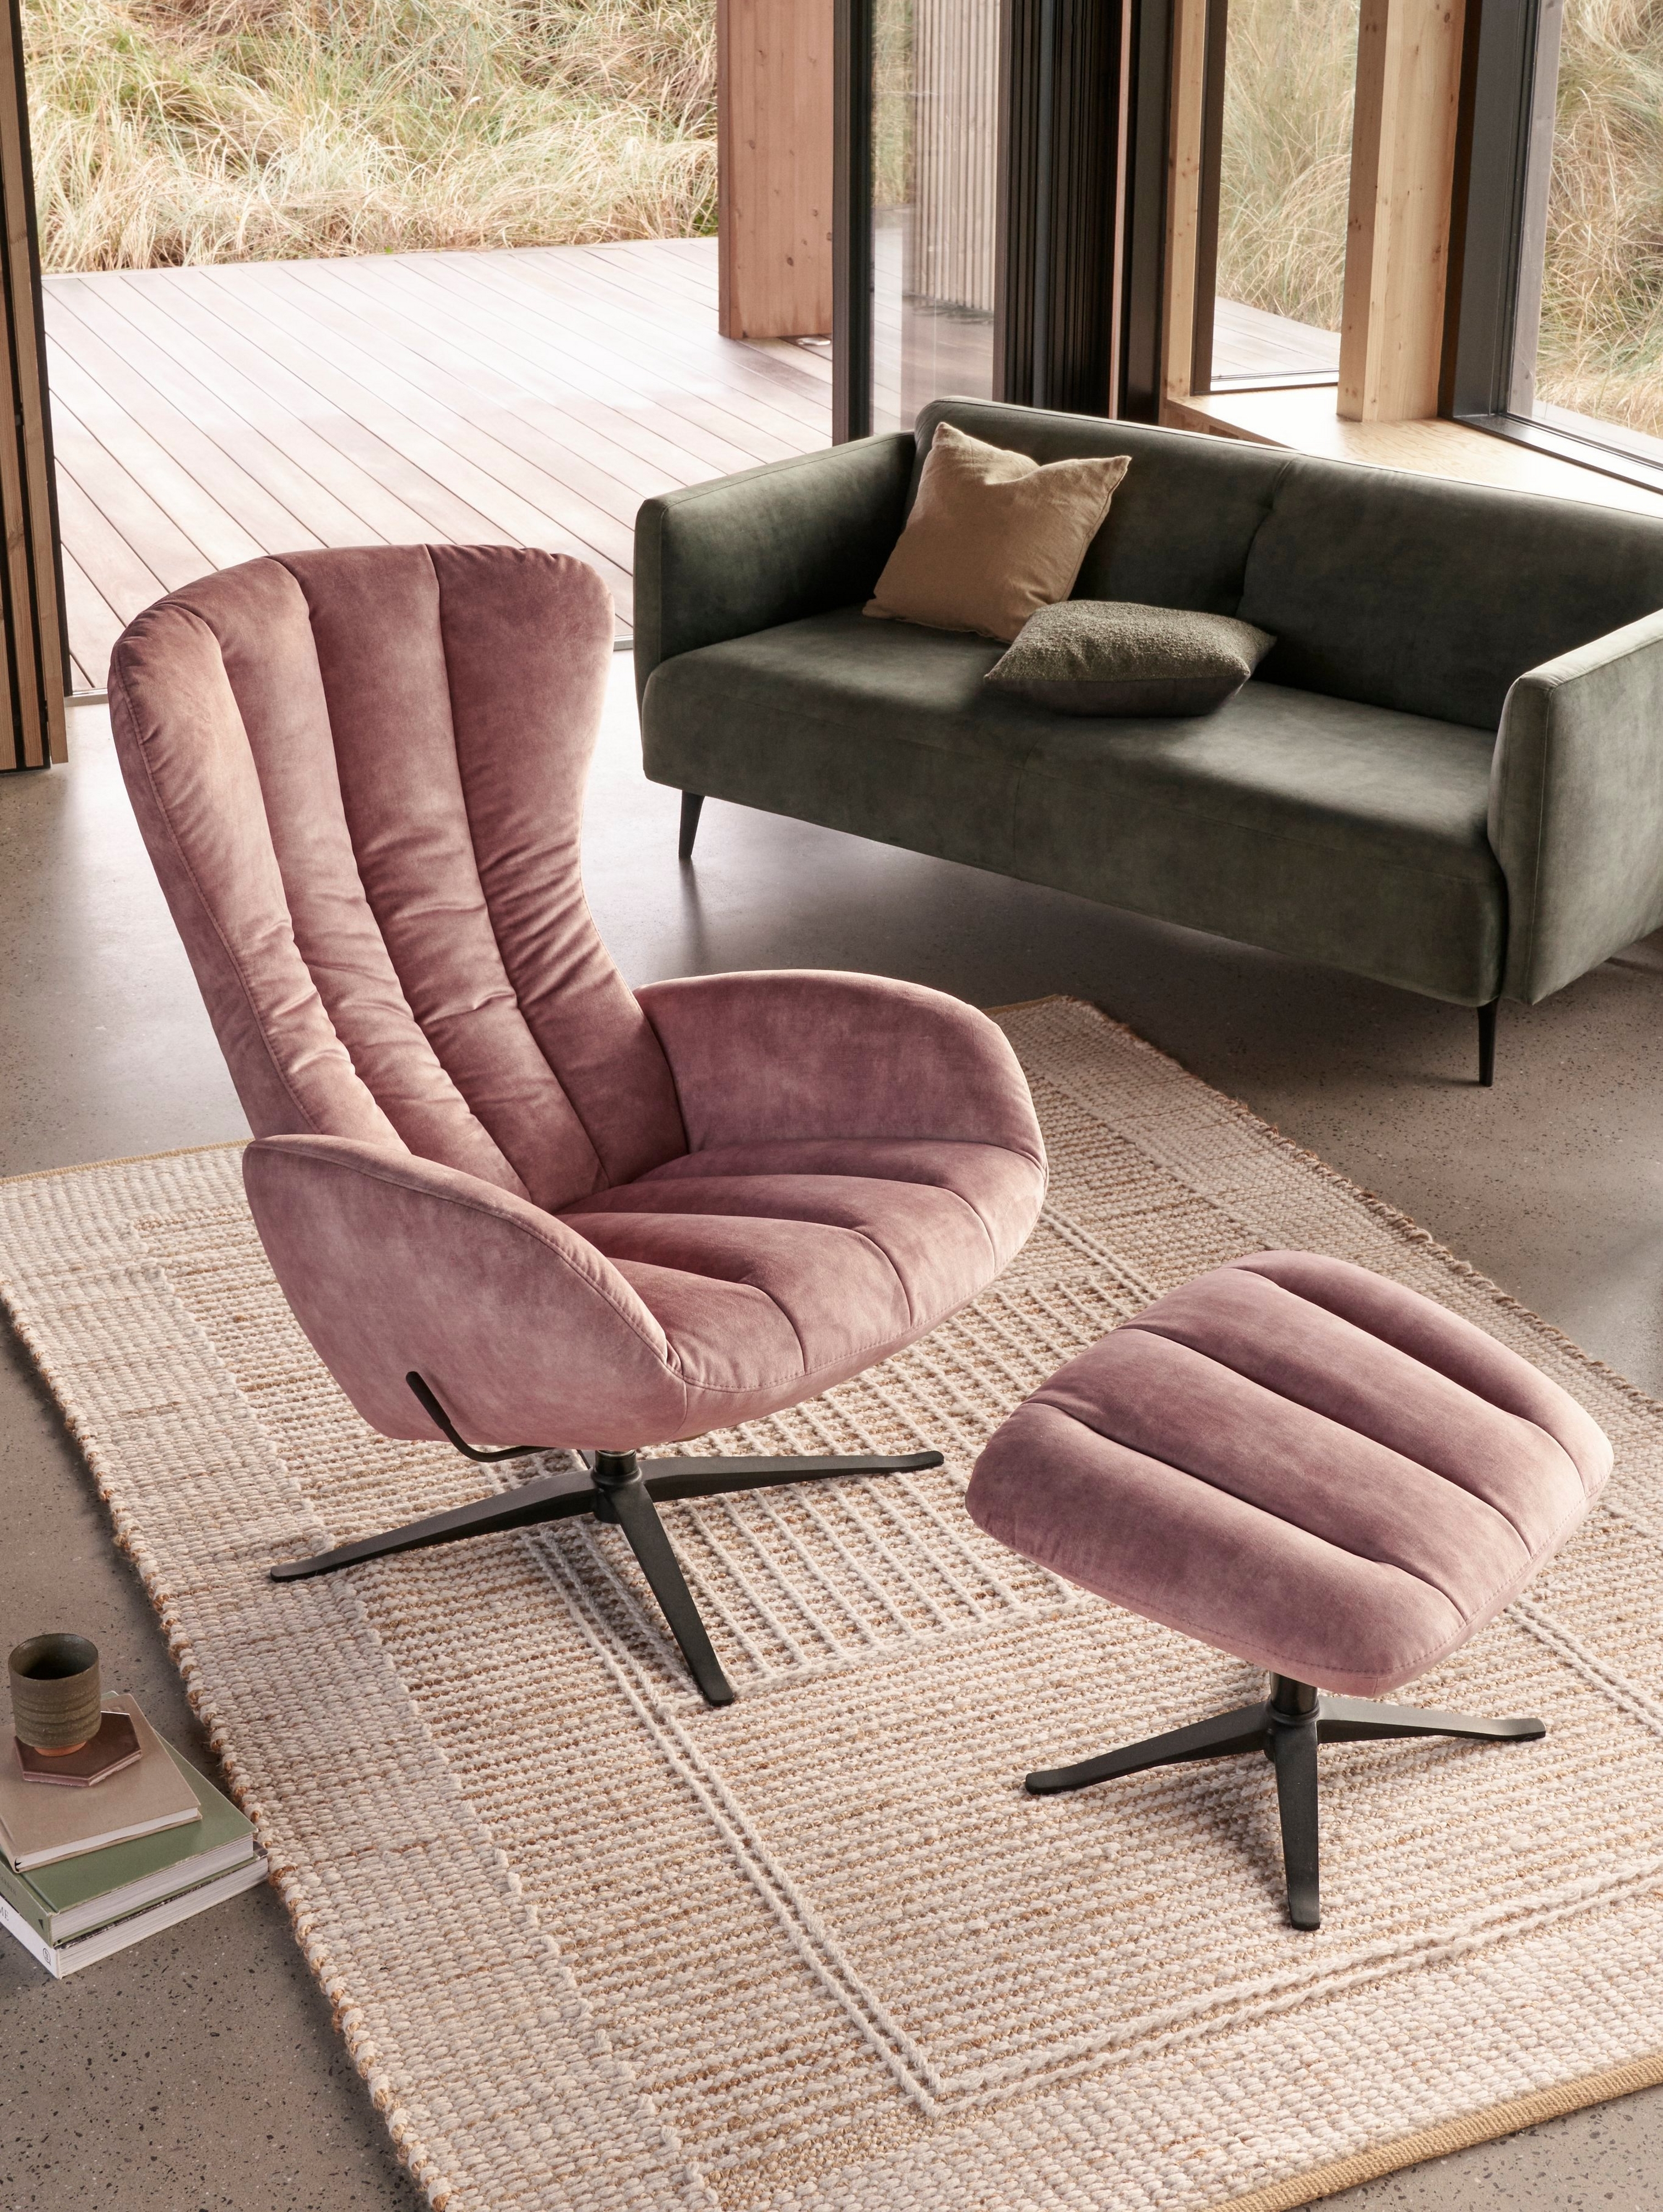 Light-filled living space featuring the Tilburg living chair and matching foot stool in dusty rose Ravello fabric.